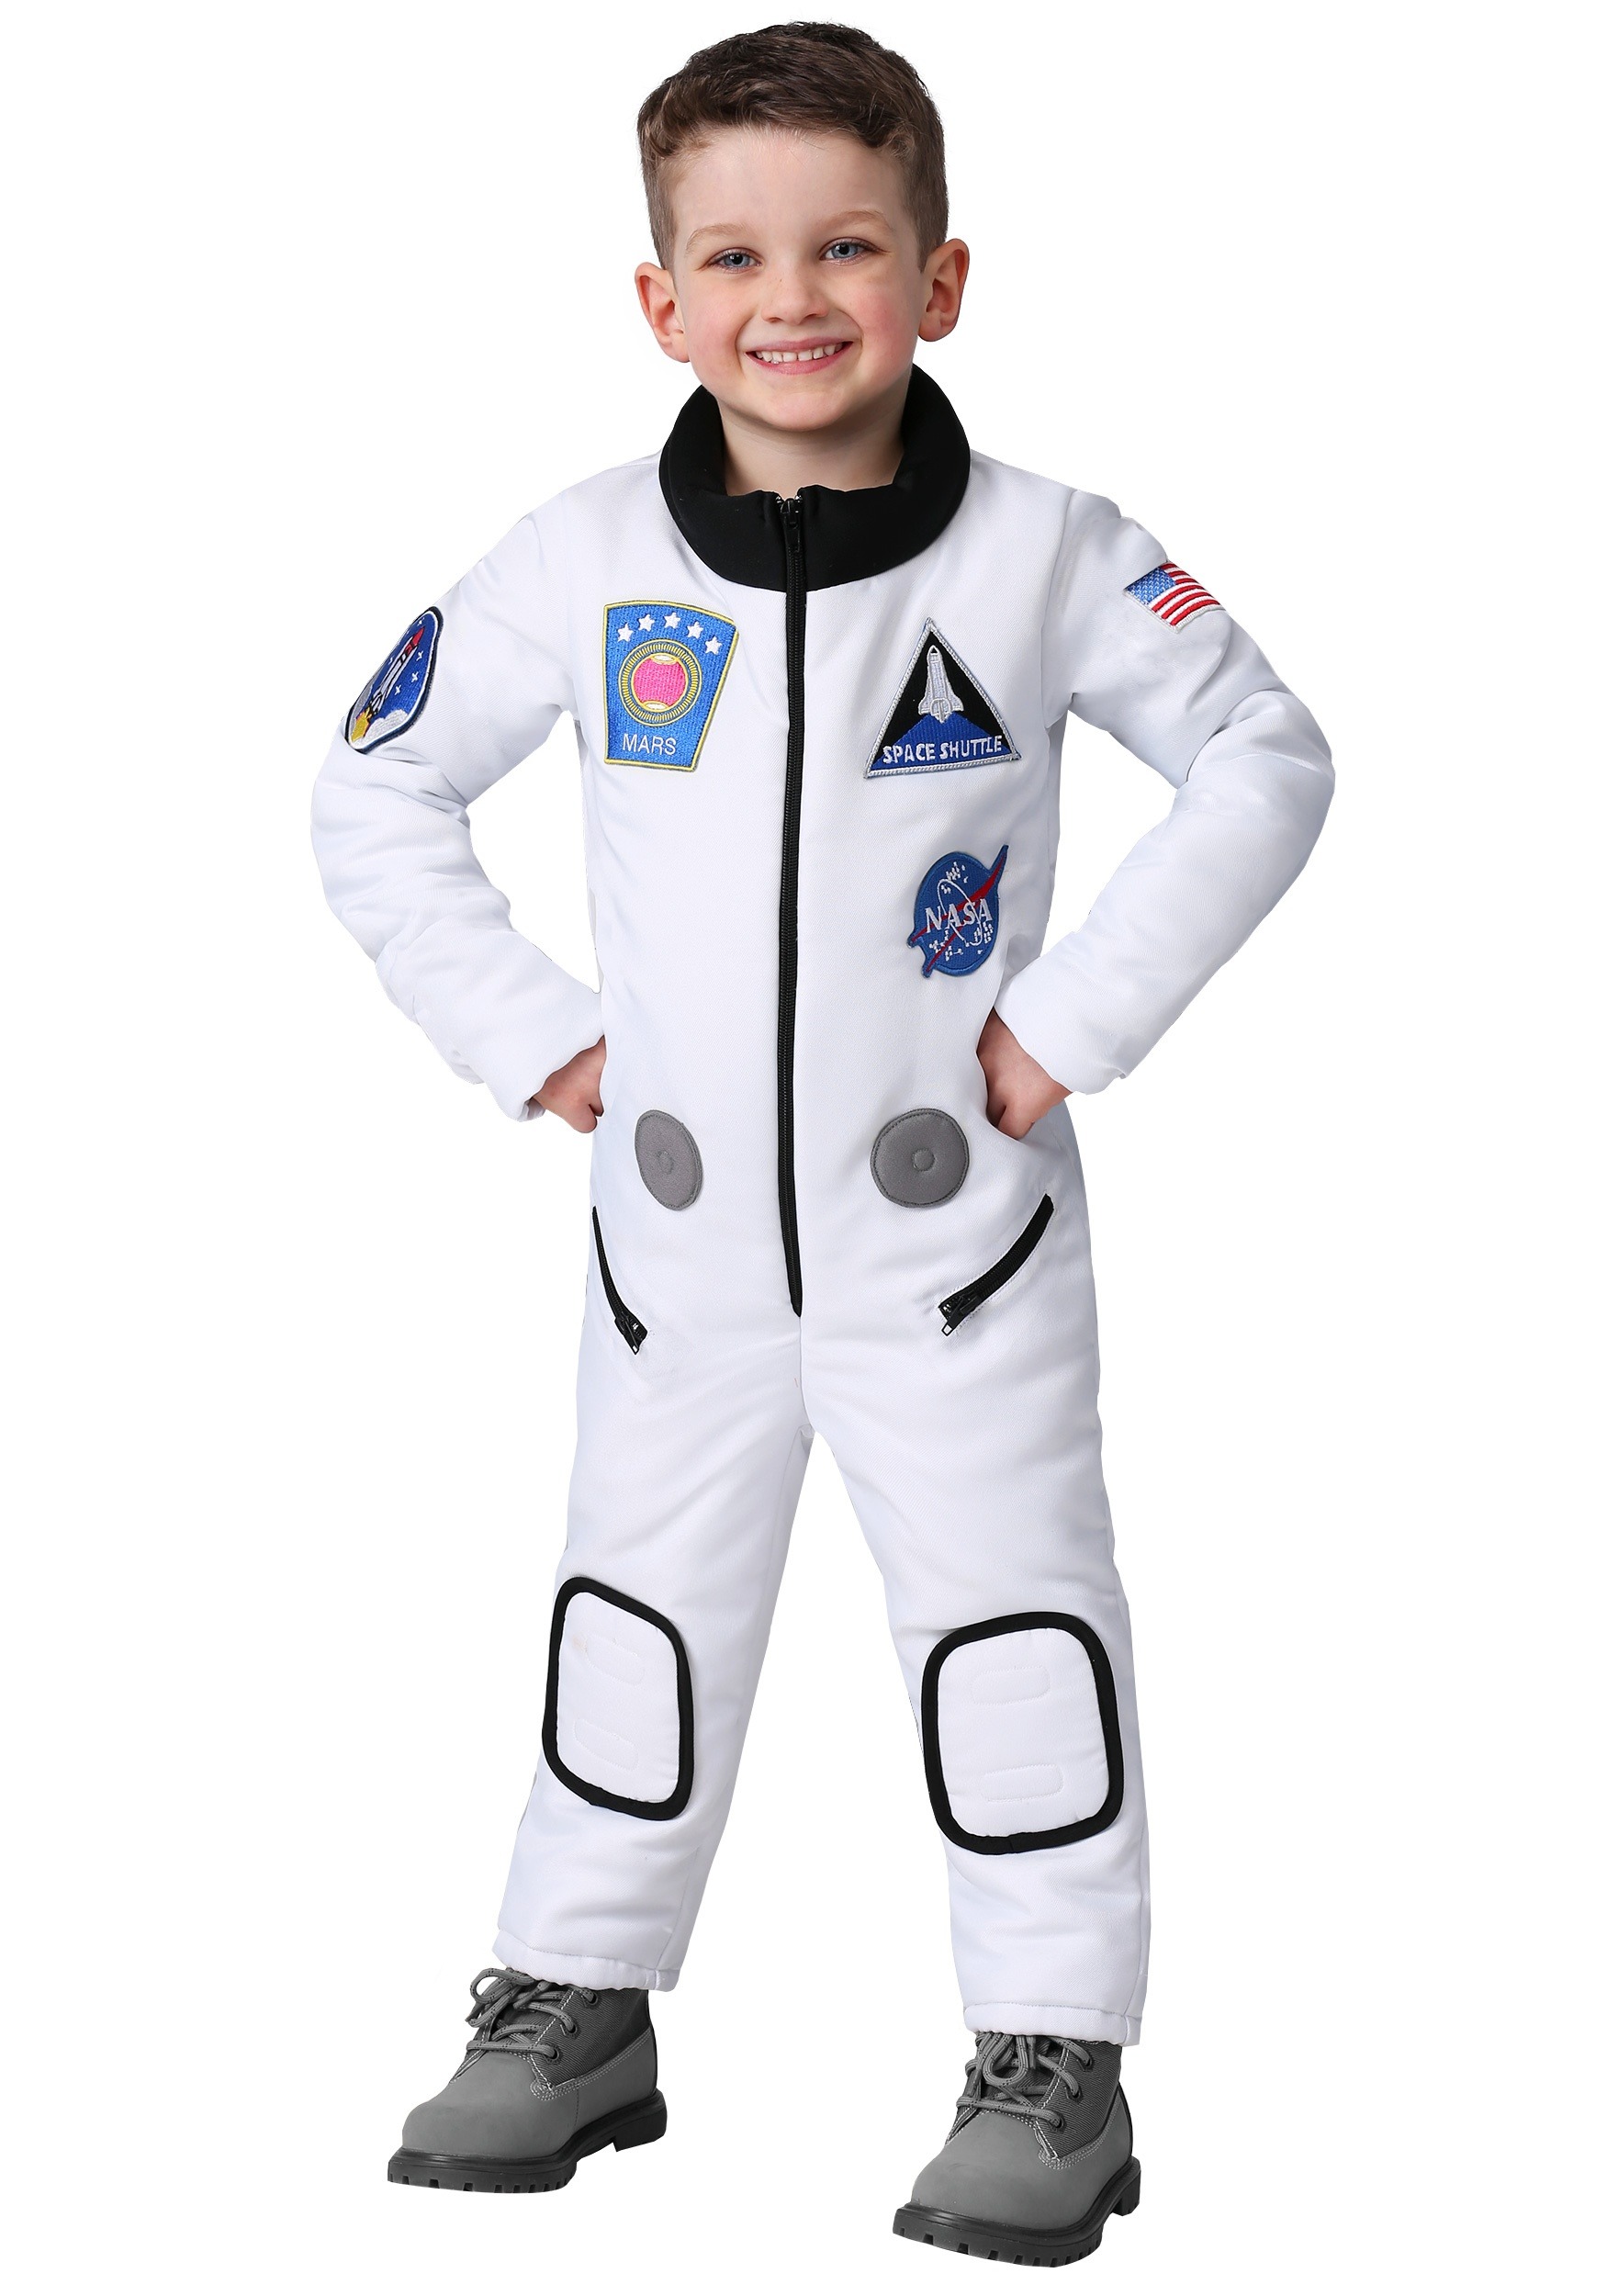 Photos - Fancy Dress Deluxe FUN Costumes  Astronaut Costume for a Toddler Blue/Yellow/Wh 